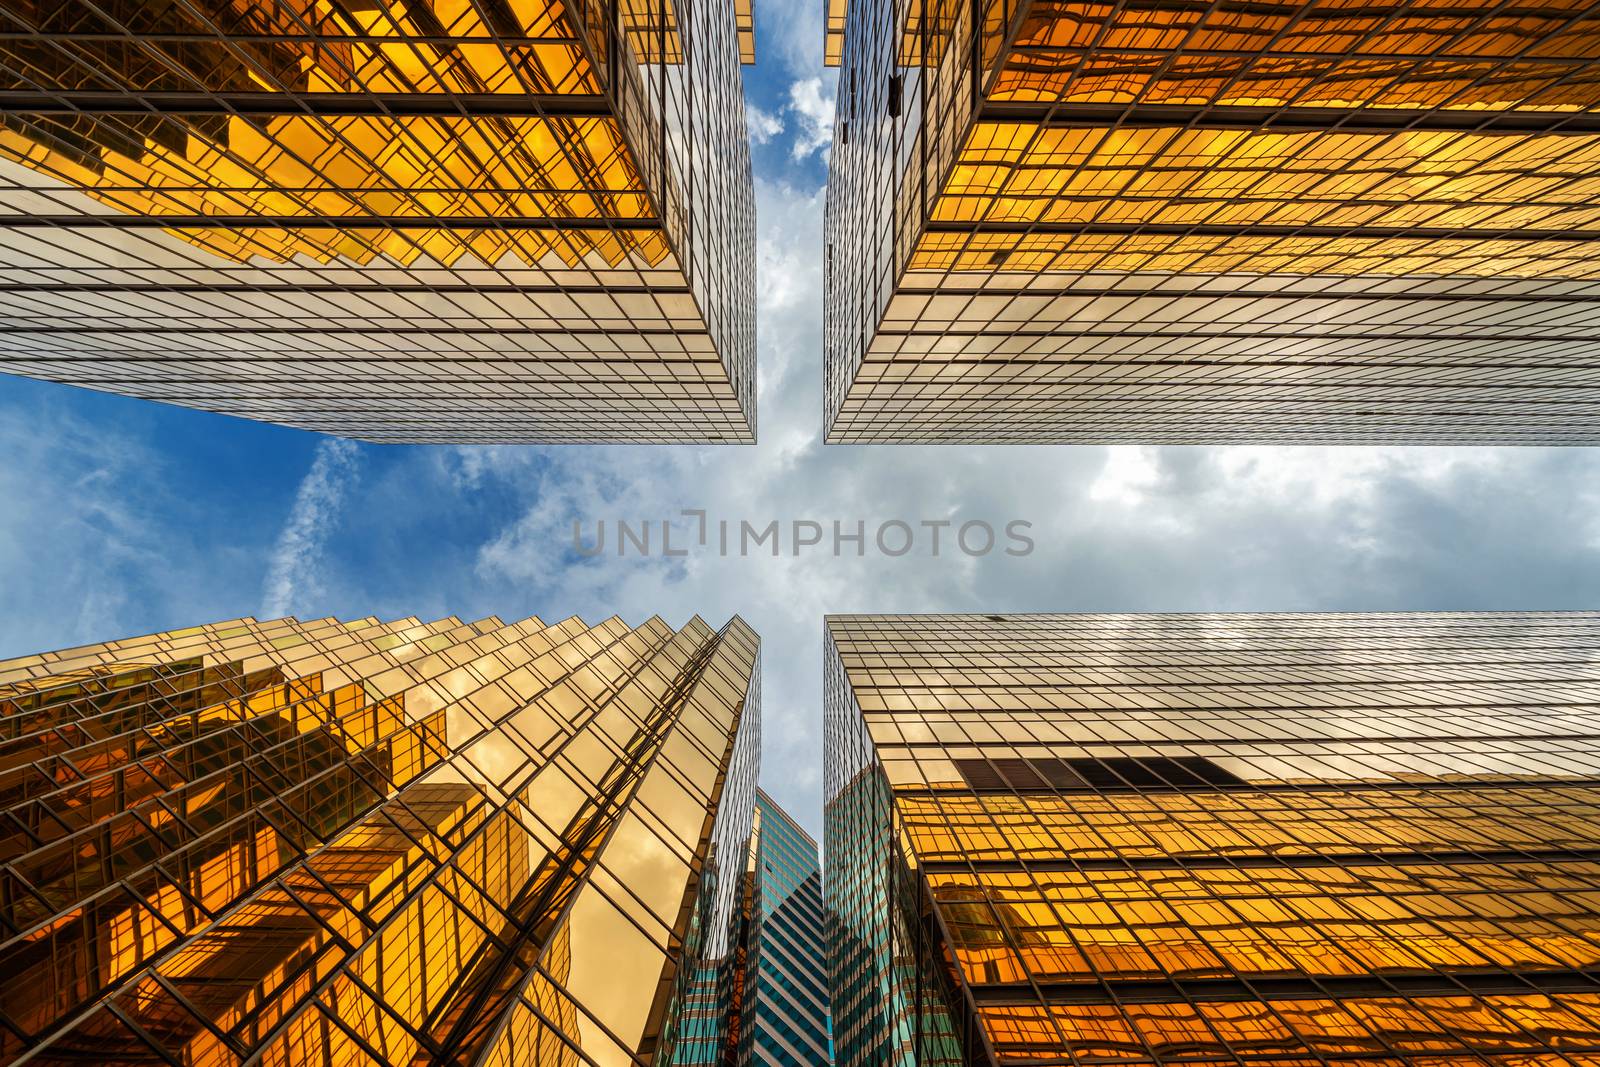 Uprisen angle of Hong Kong skyscraper with reflection of clouds by Tzido